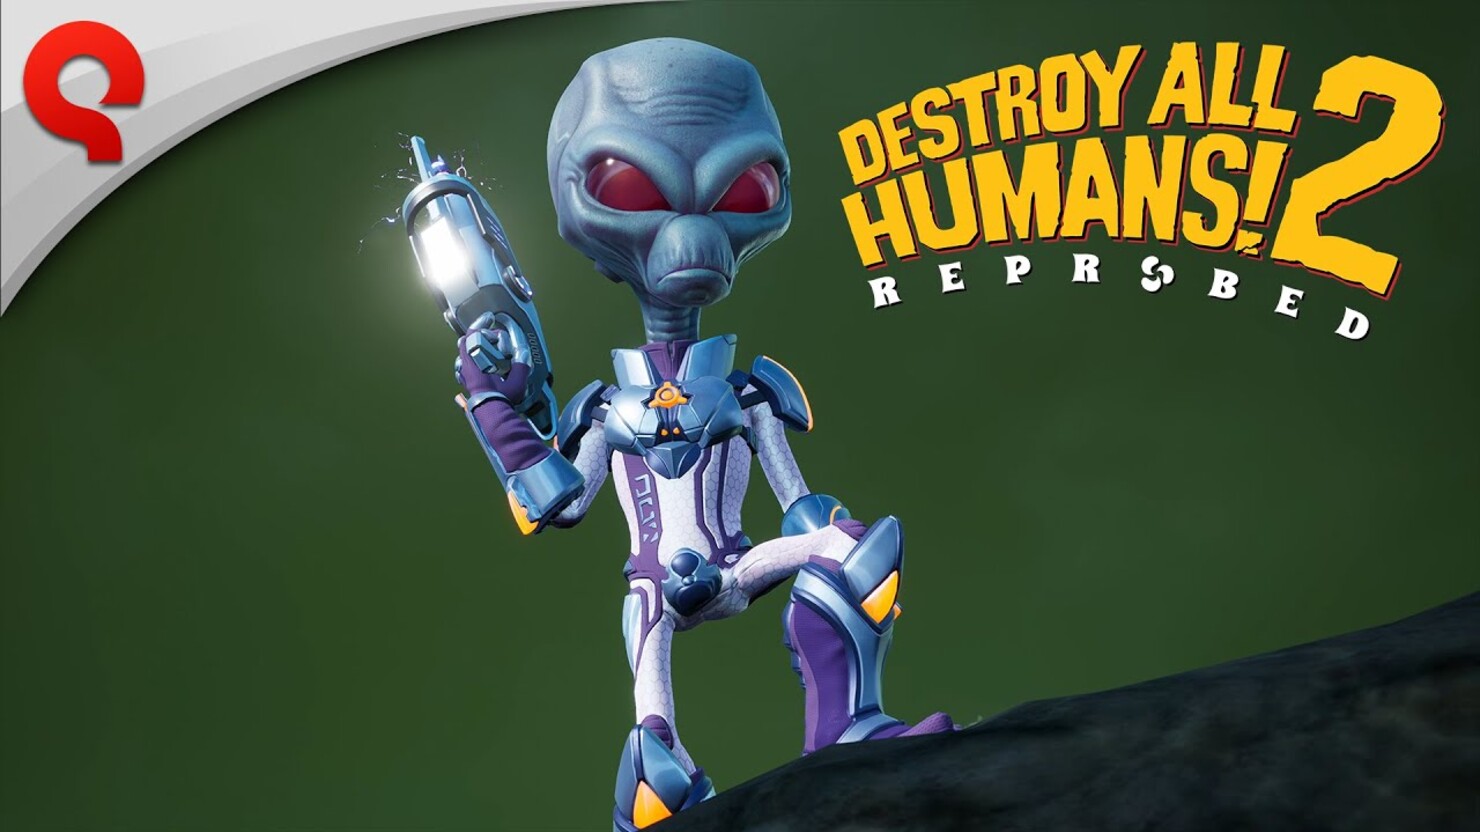 Destroy all humans reprobed. Destroy all Humans 2 reprobed 2022. Destroy all Humans 2 reprobed трейлер. Destroy all Humans!. Destroy all Humans 2 2006.